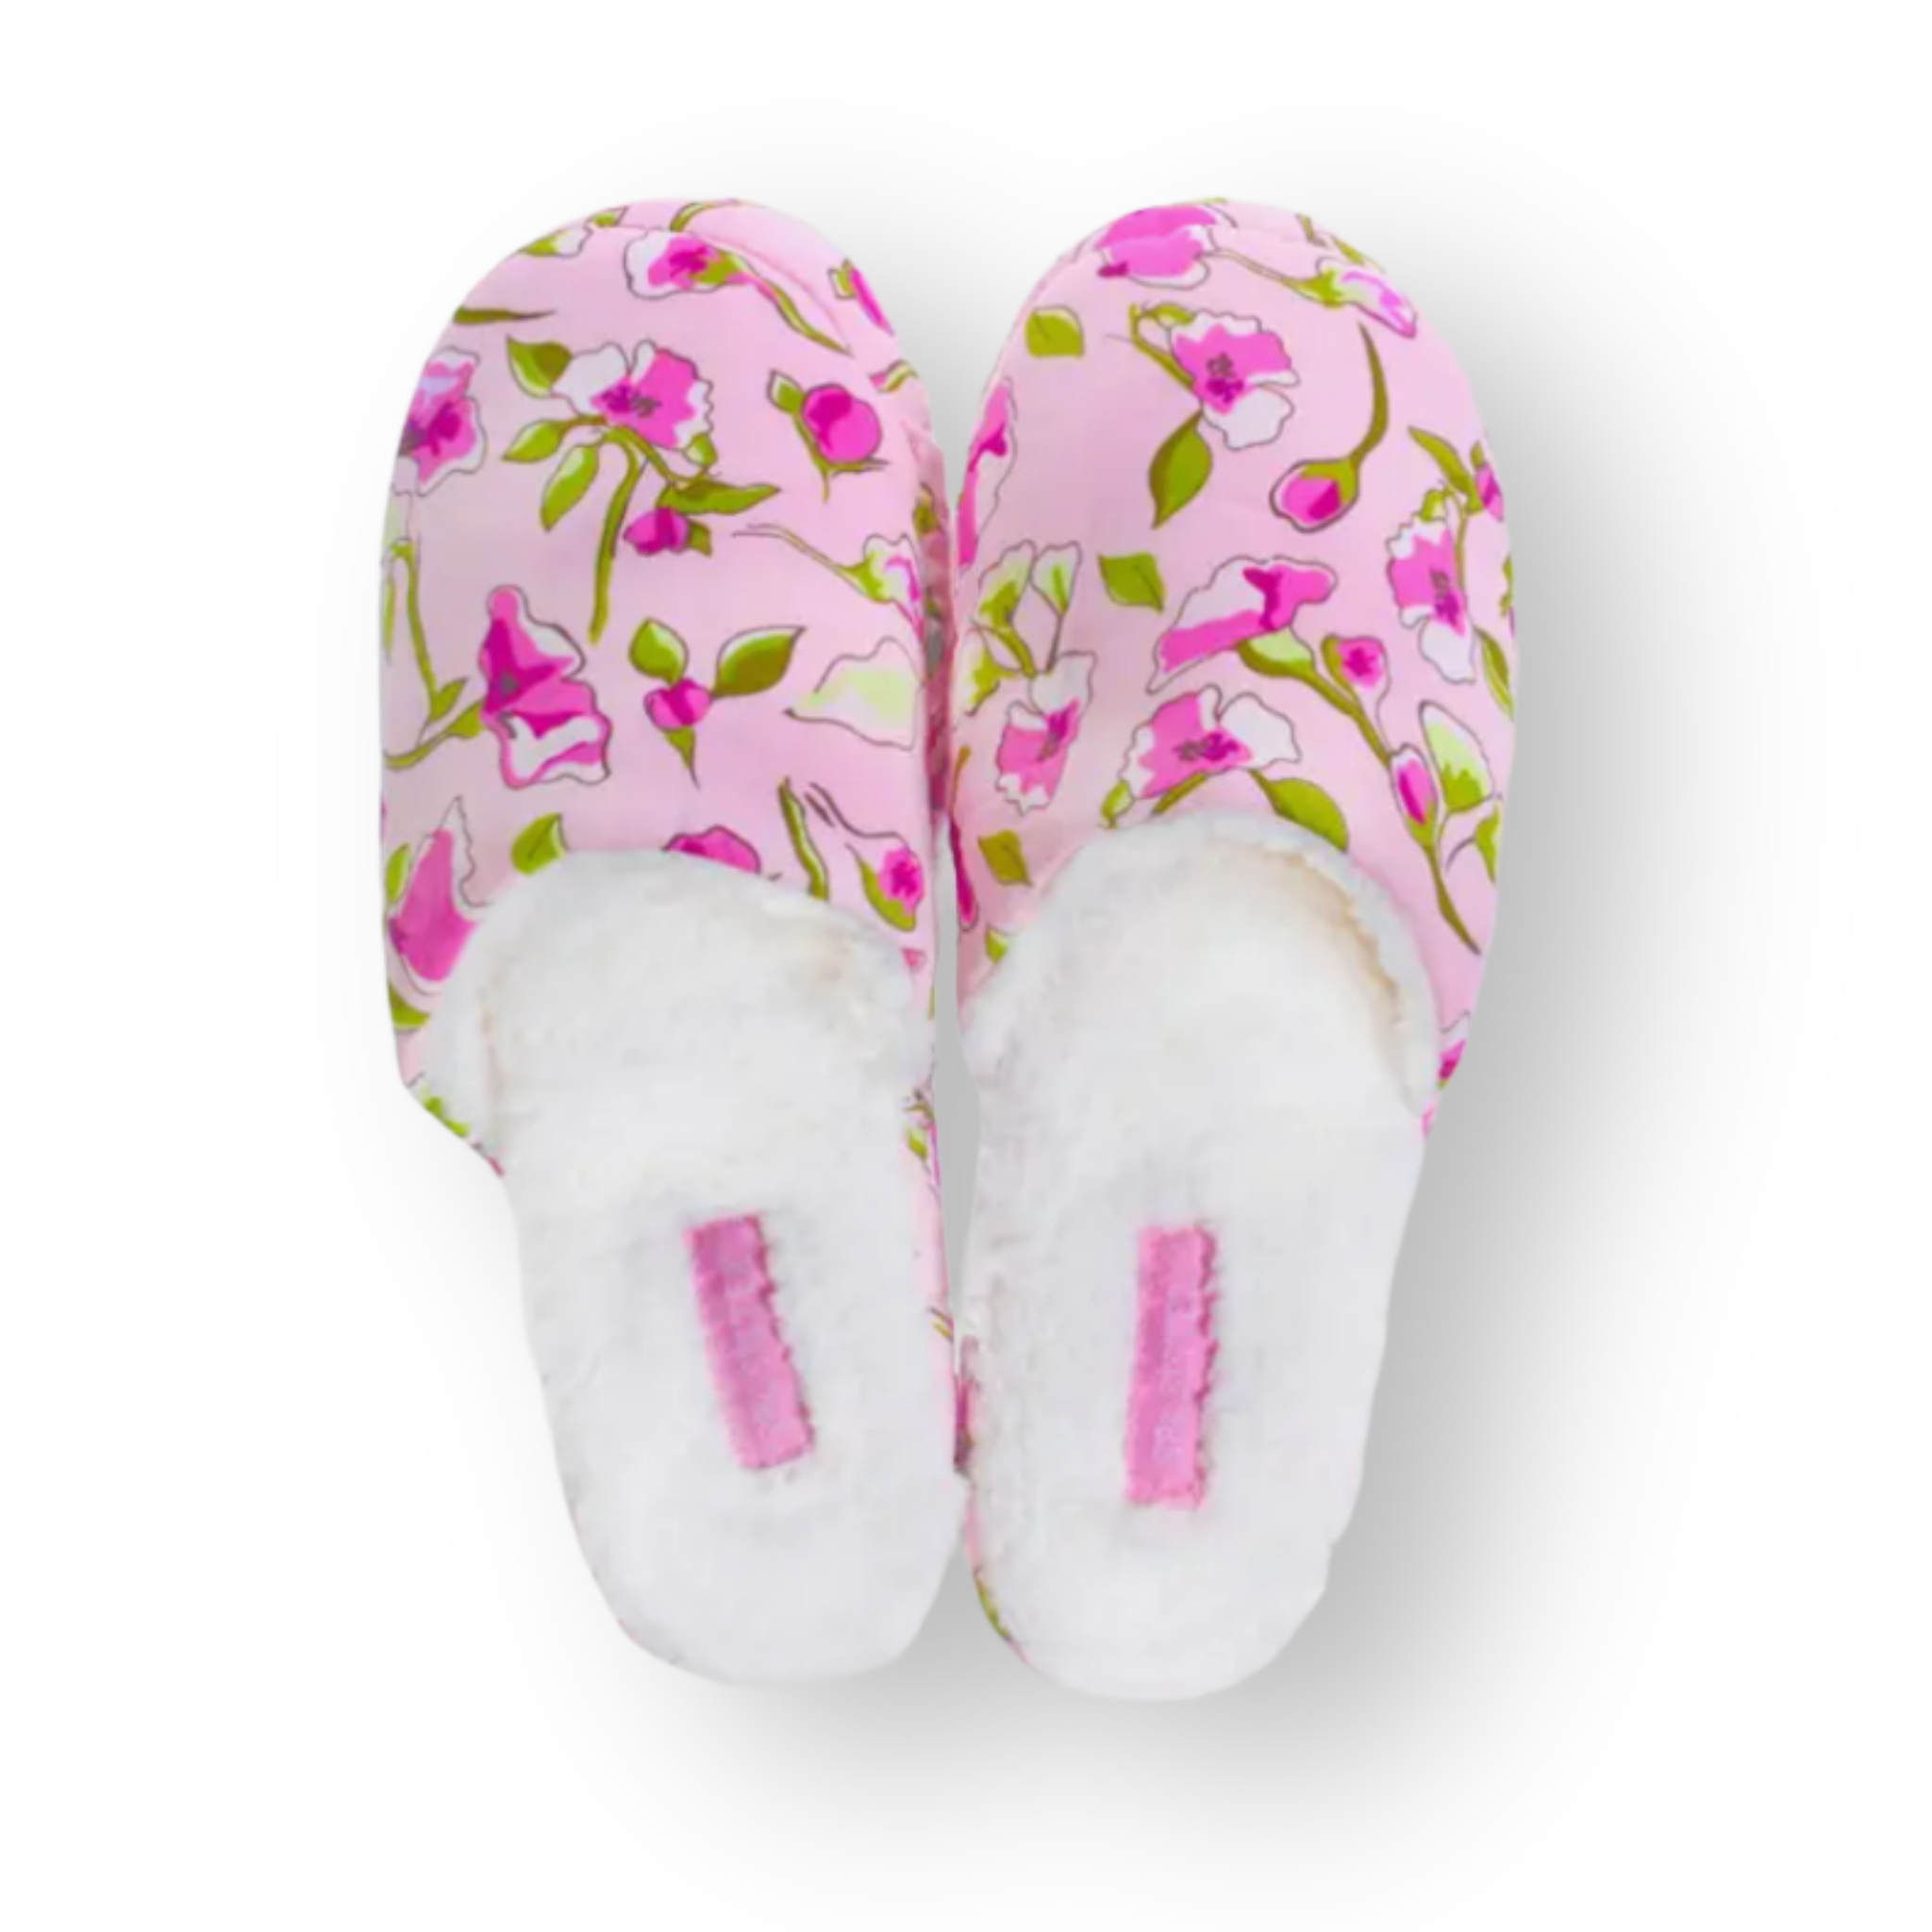 Spa Sister Floral Spa Slippers Pink Rose